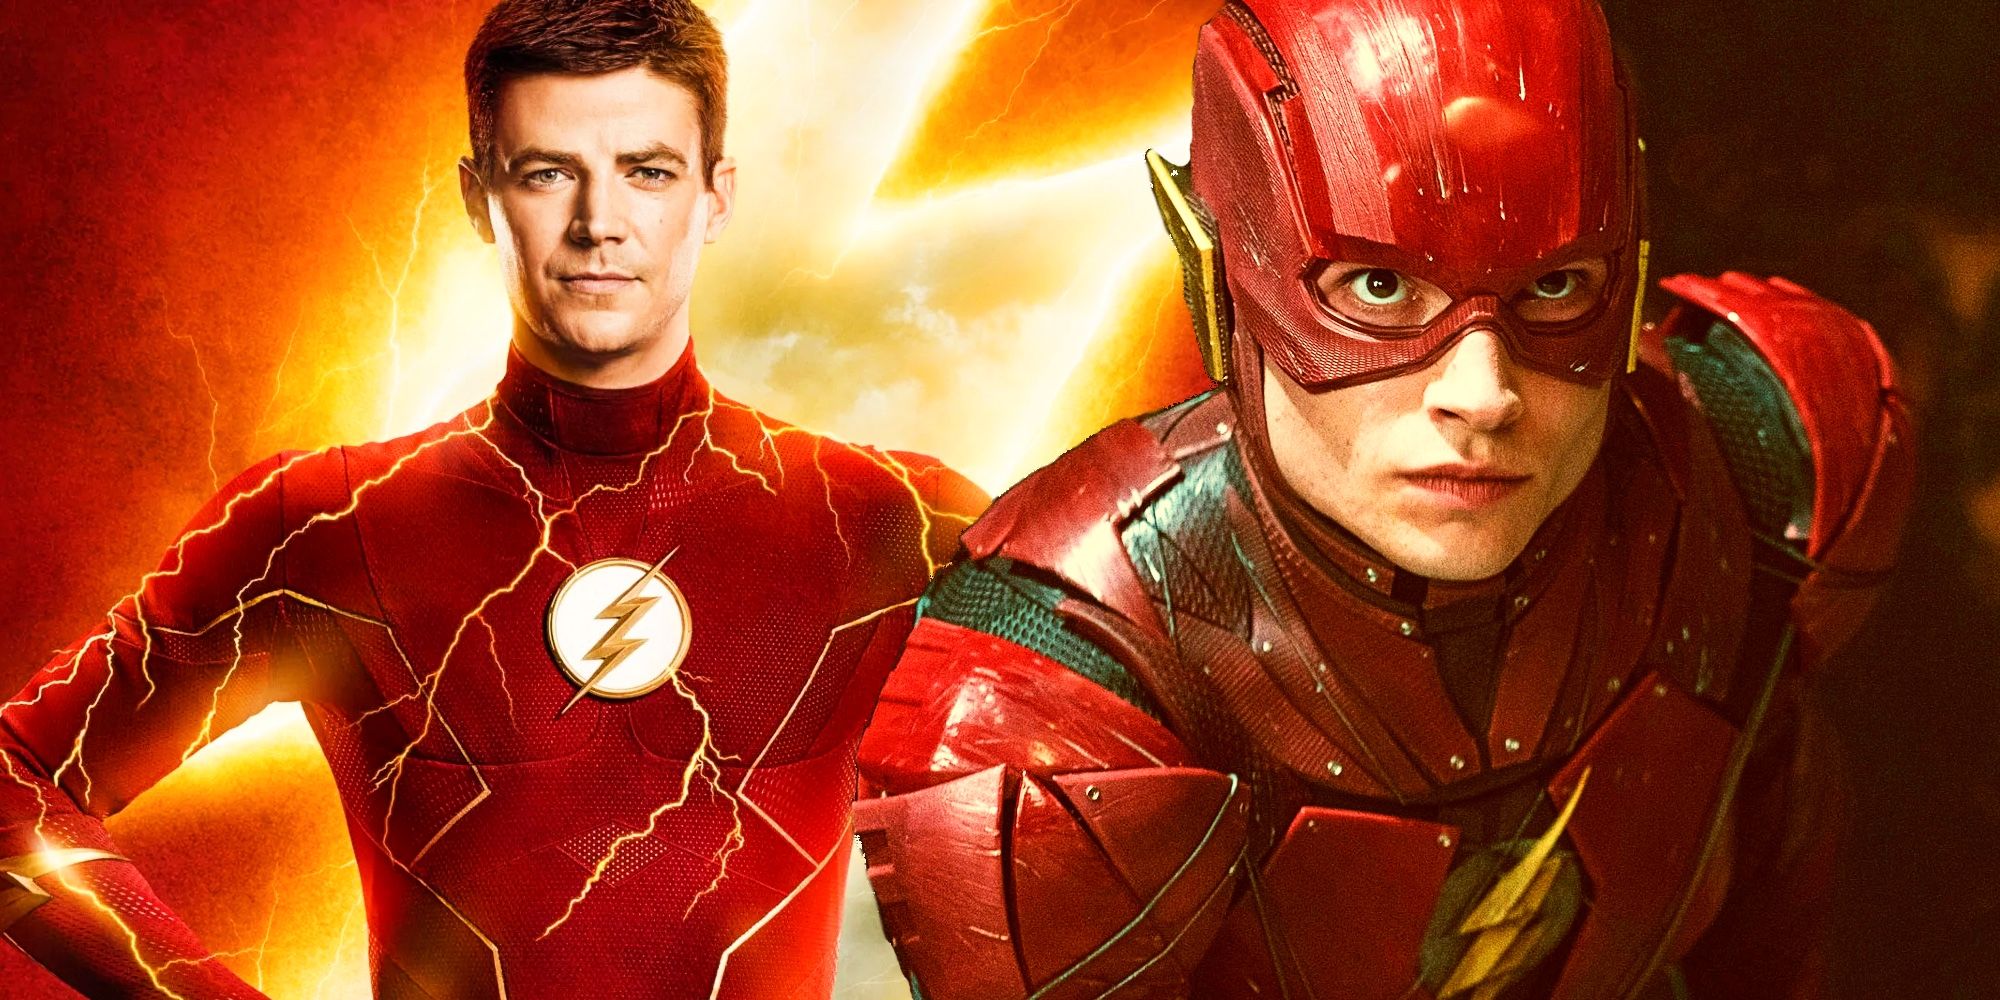 Montage of Grant Gustin's Barry Allen on the left with Ezra Millers The Flash on the right.